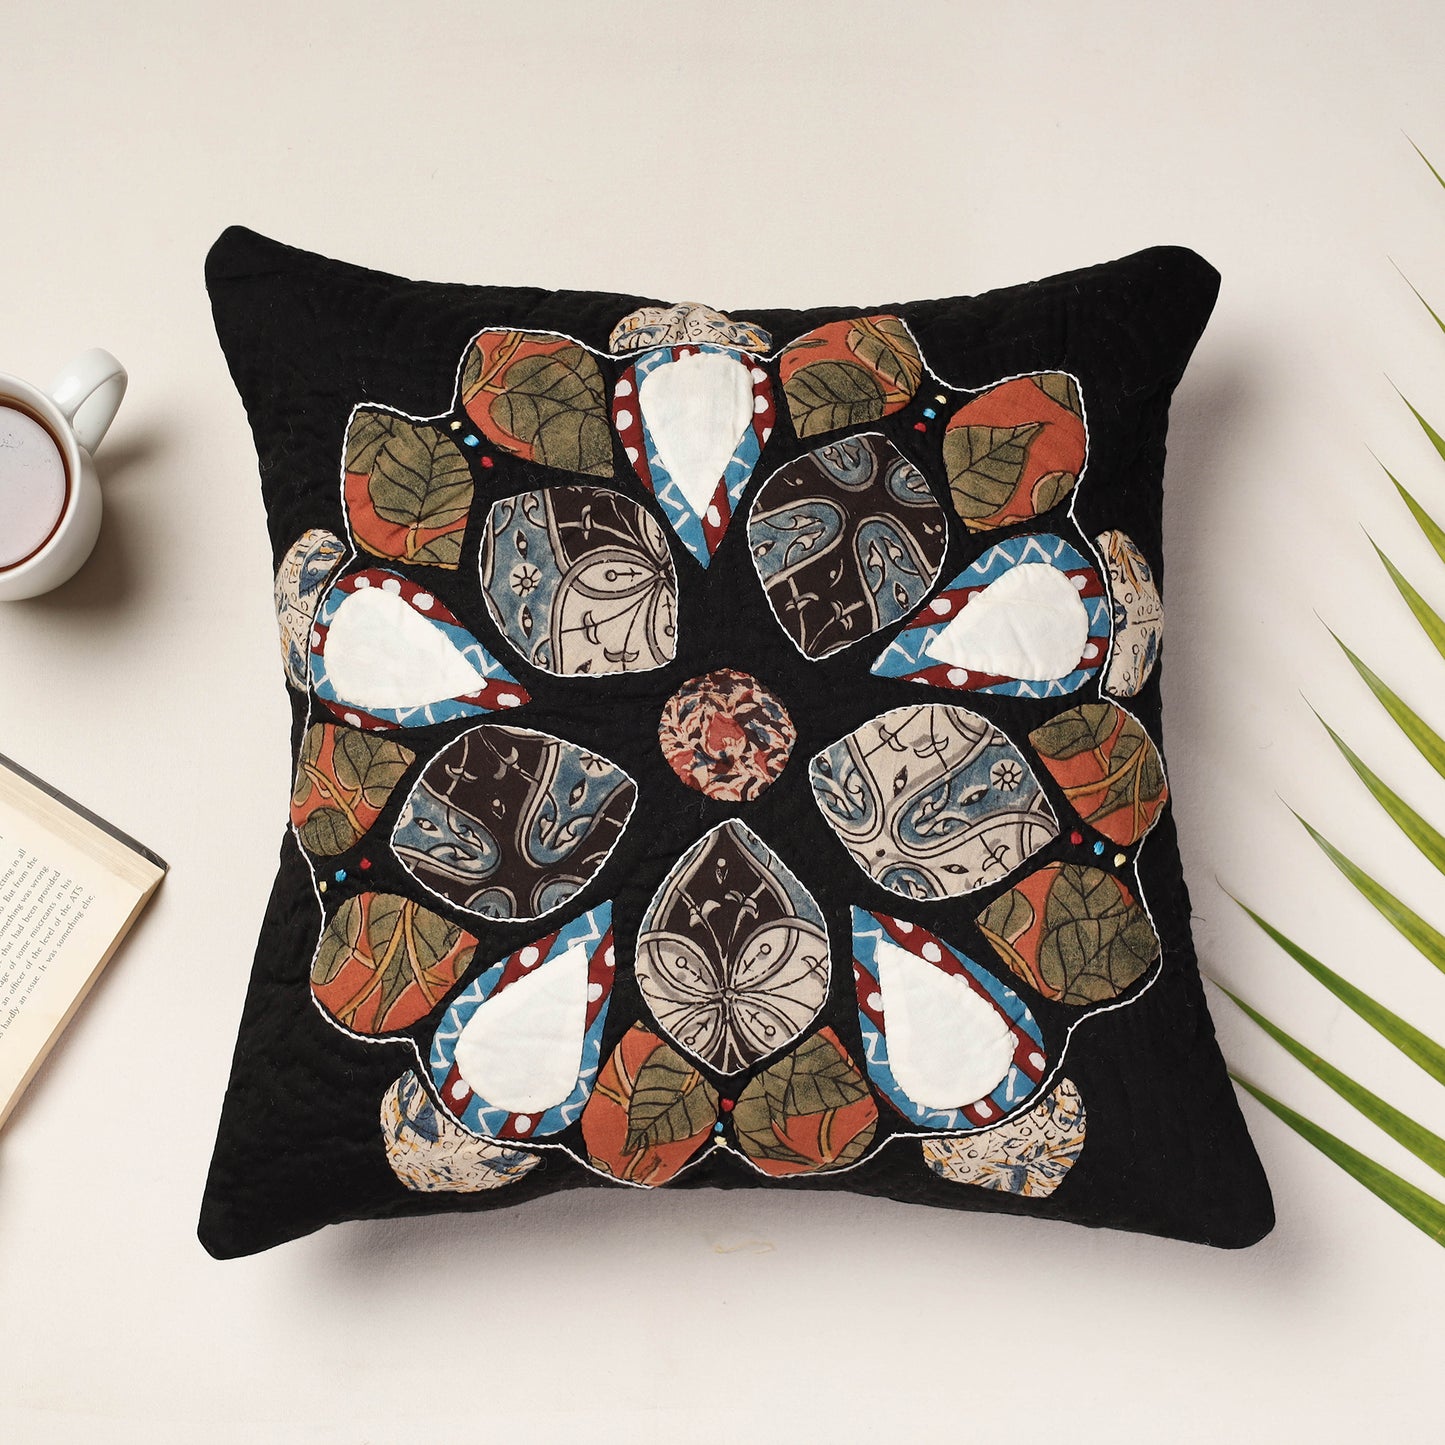 Black - Applique Quilted Cotton Cushion Cover (16 x 16 in)